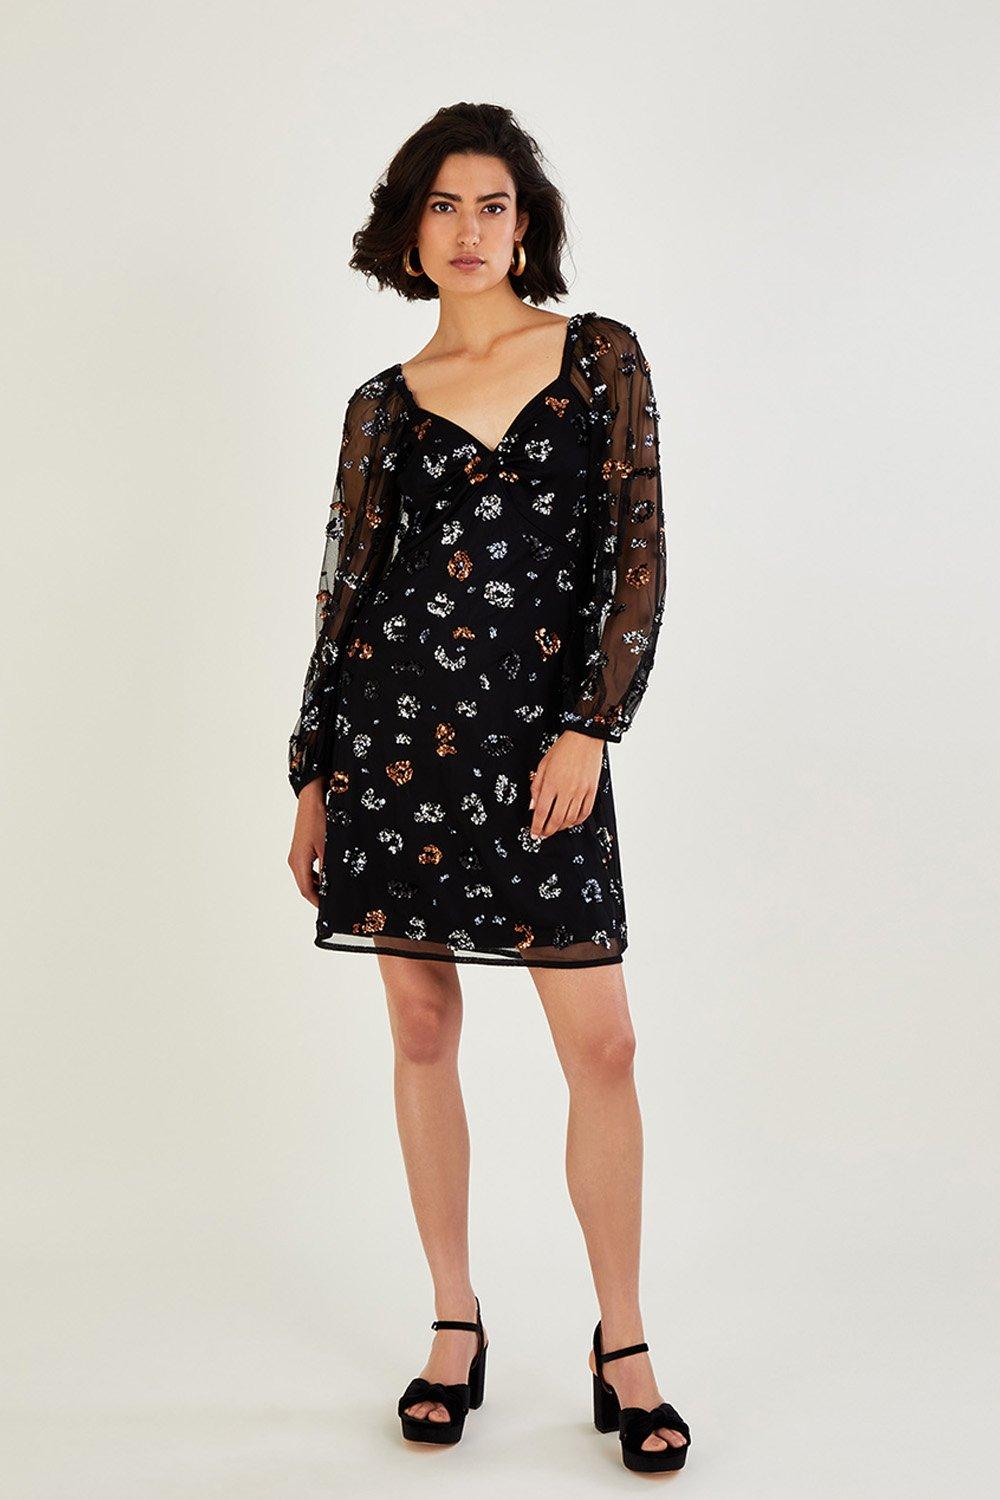 'Marianly' Sequin Animal Print Dress